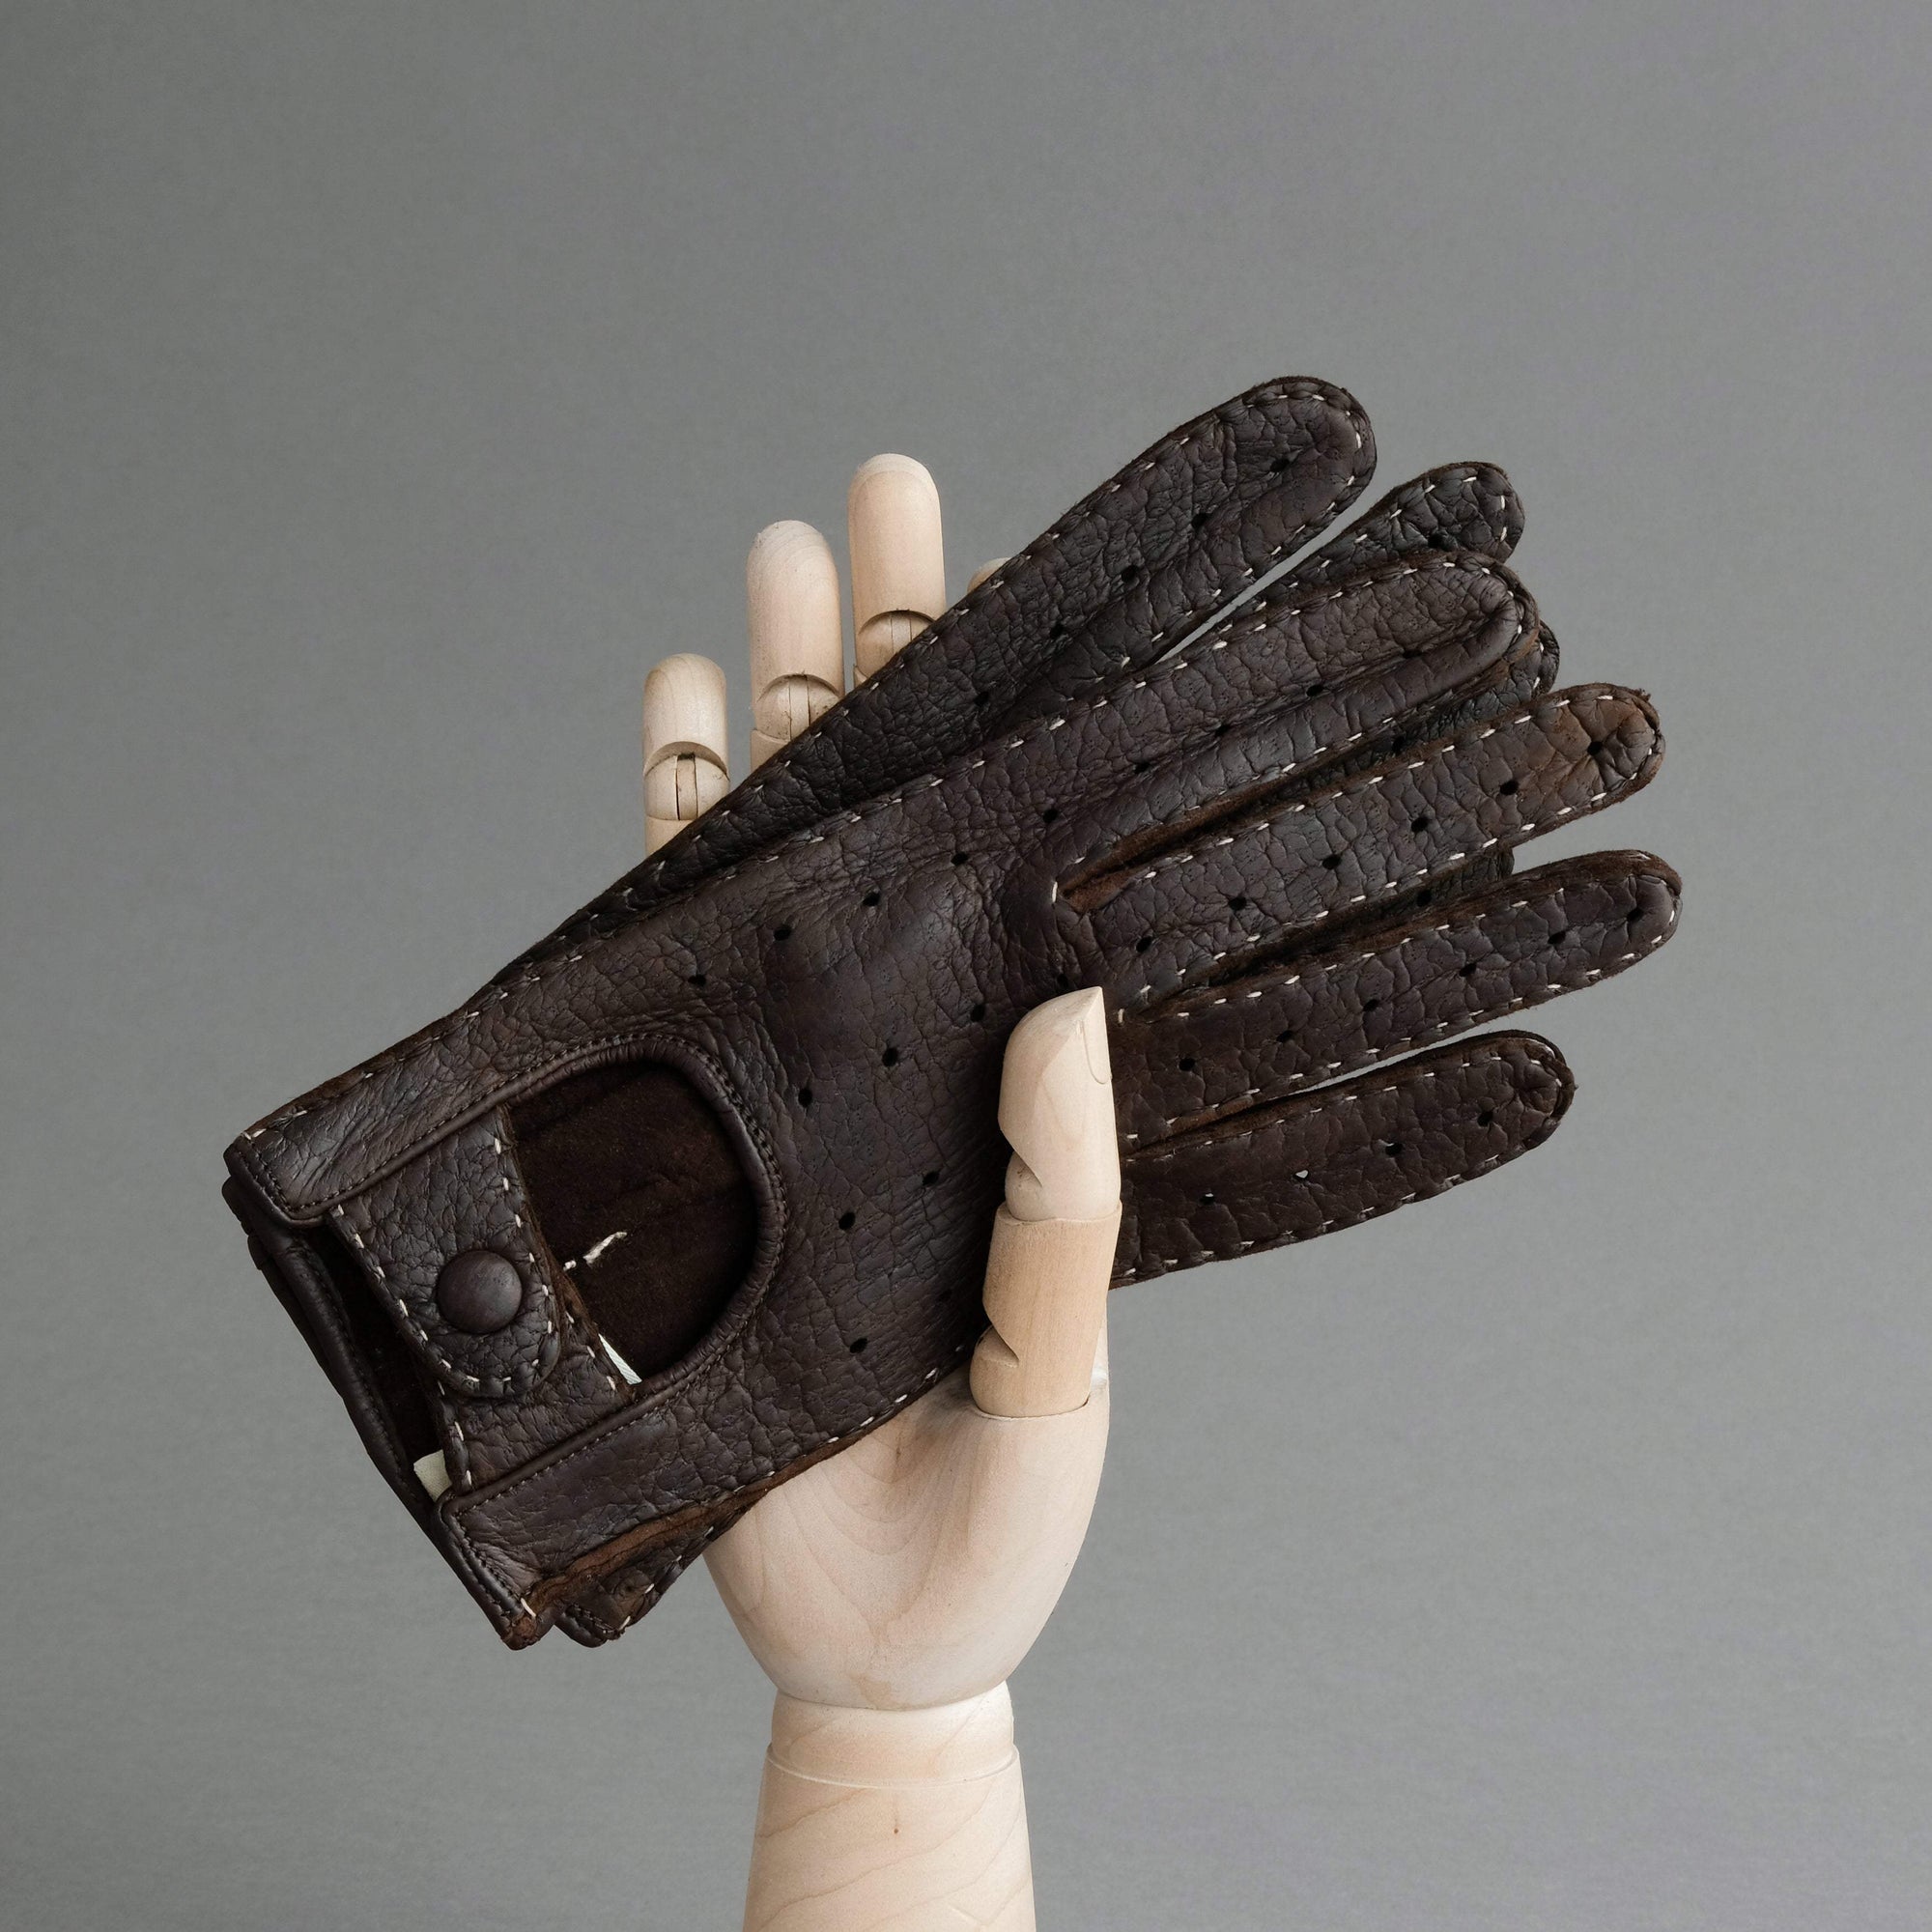 Ladies Unlined Driving Gloves From Brown Peccary Leather - TR Handschuhe Wien - Thomas Riemer Handmade Gloves